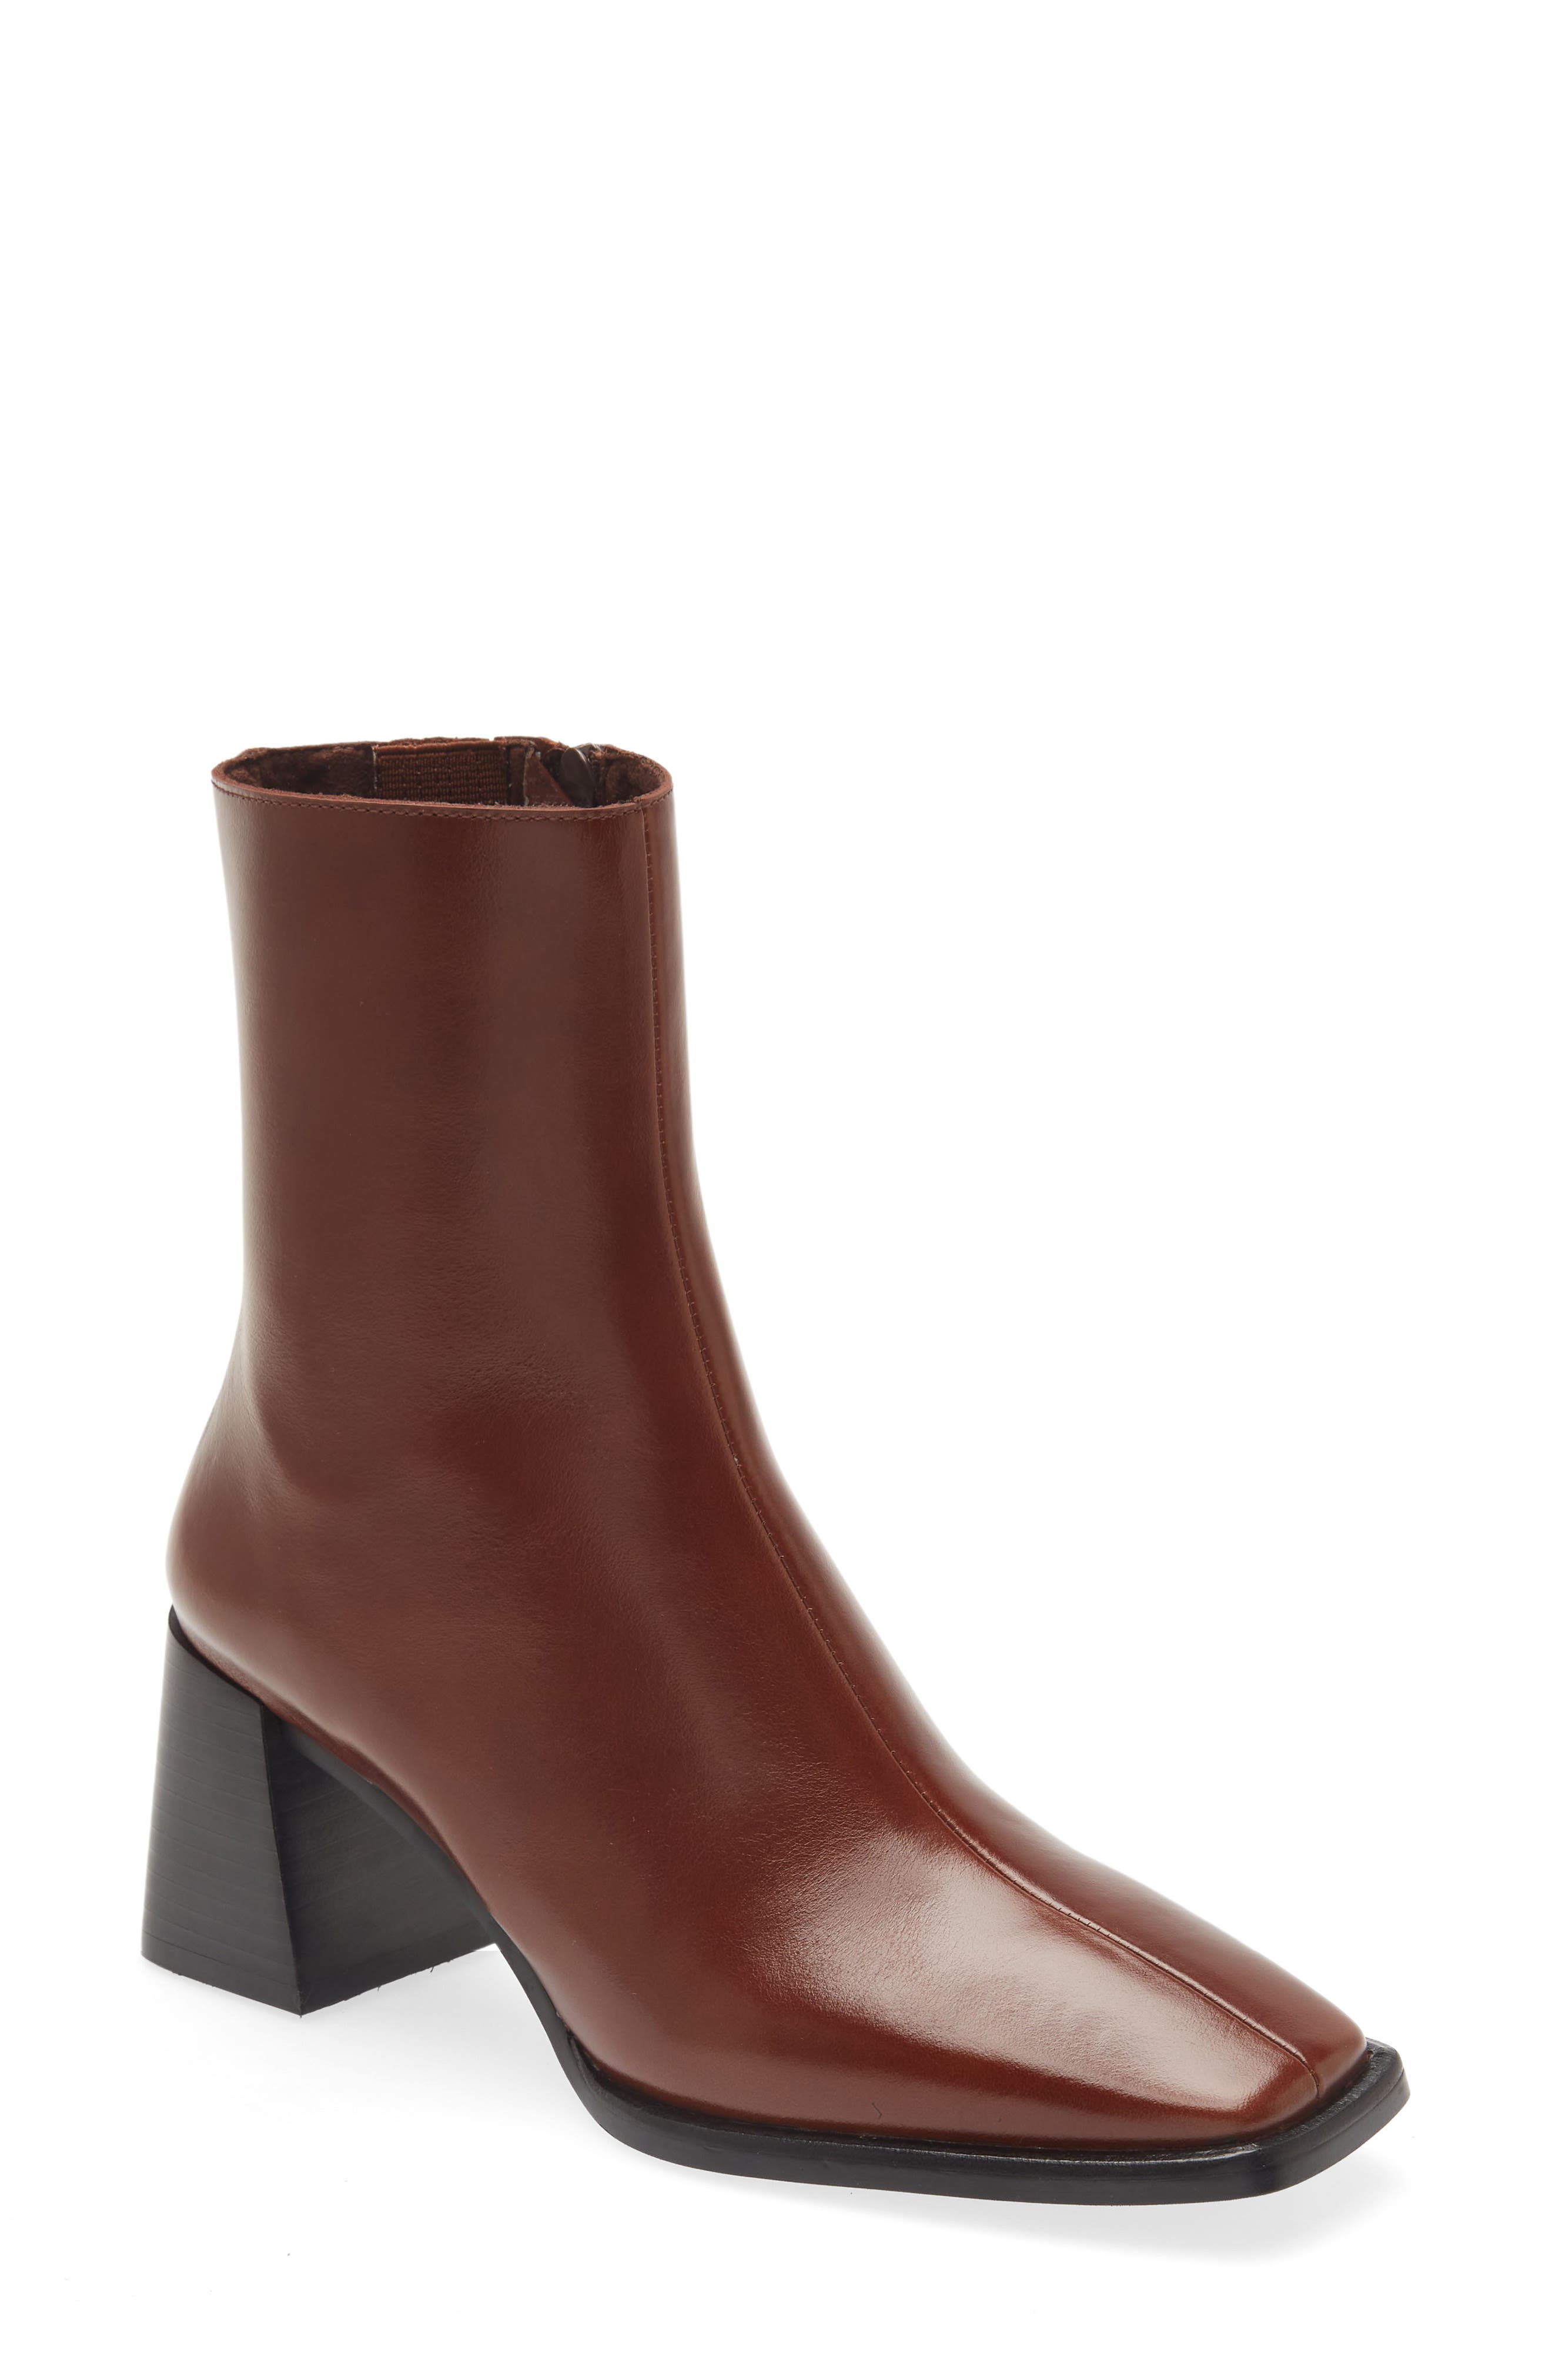 Jeffrey Campbell Geist Square Toe Boots